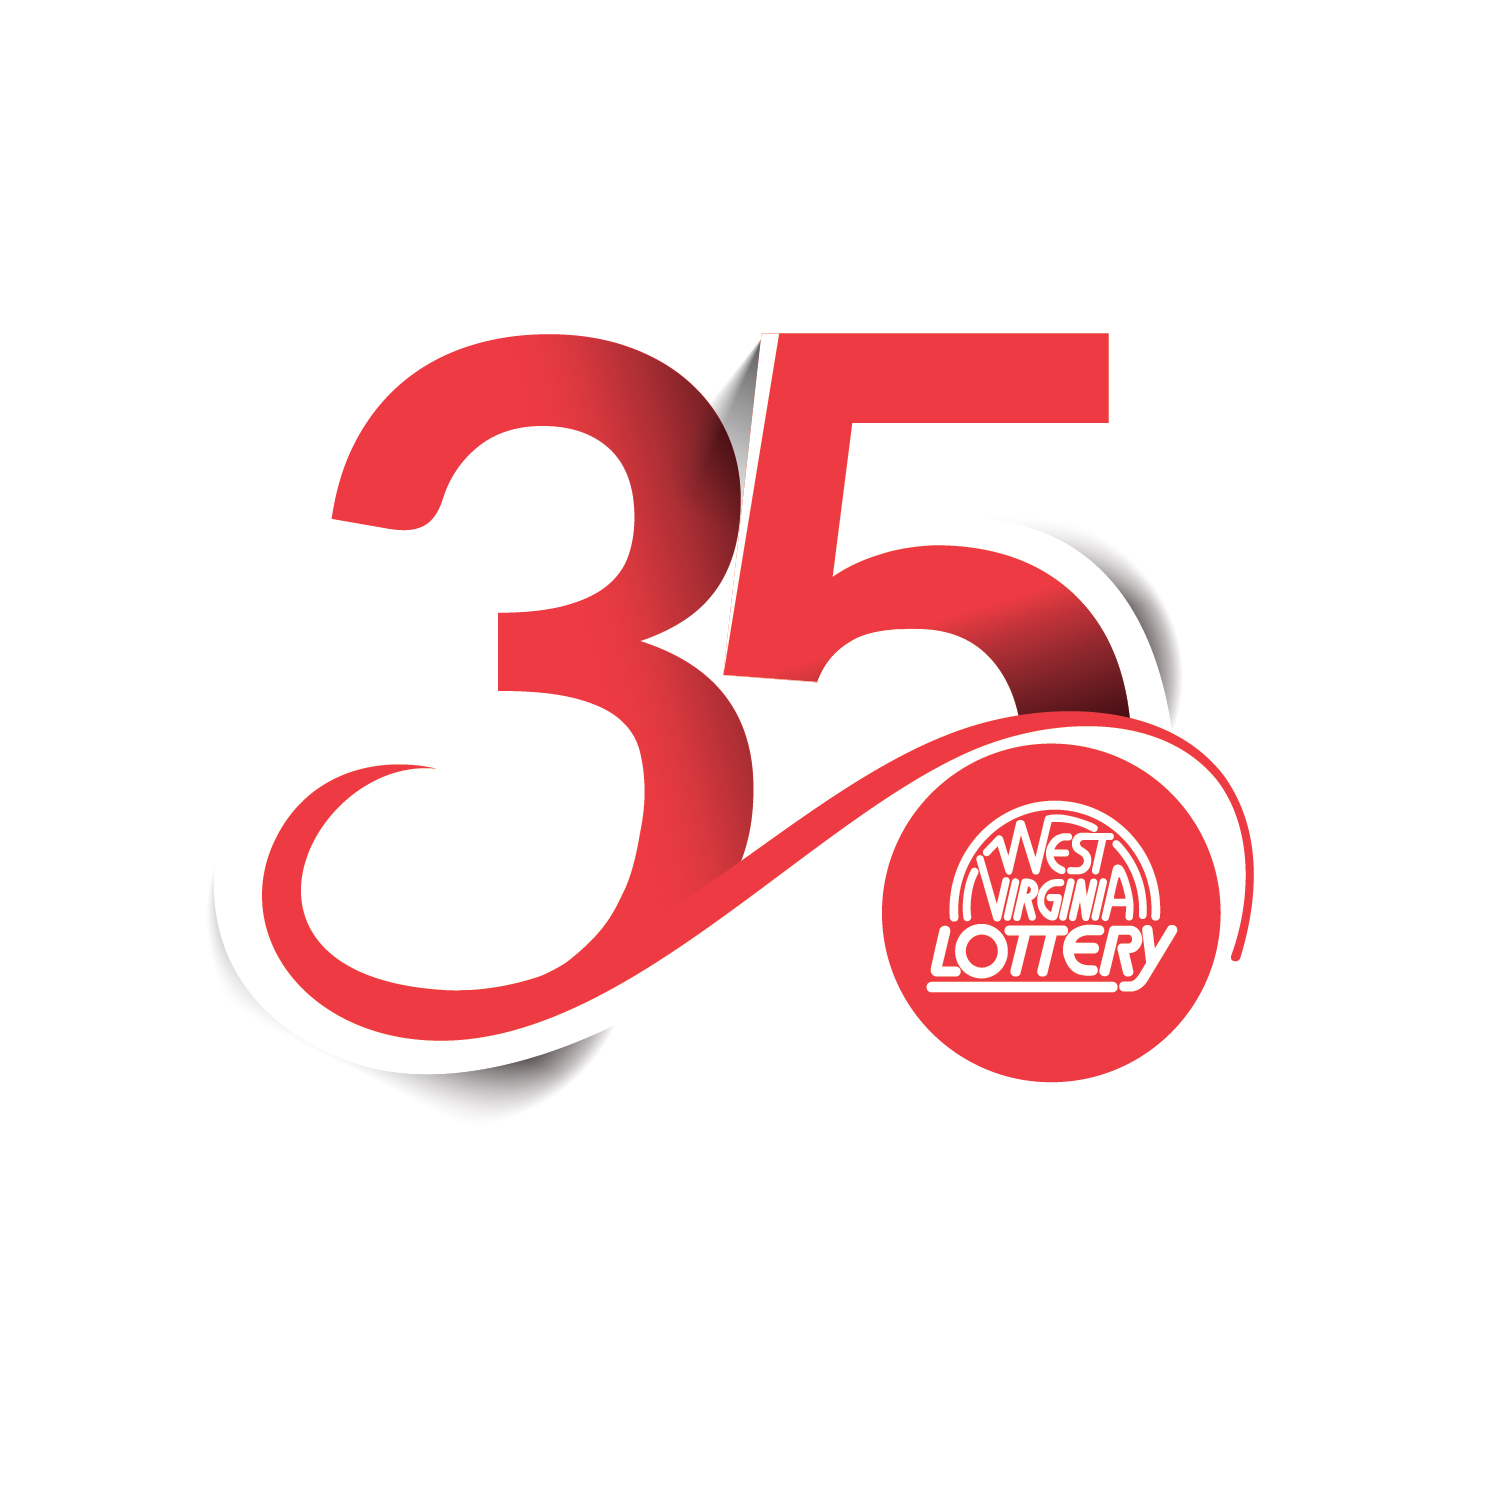 The West Virginia Lottery's The 35th Birthday Drawing Rules West